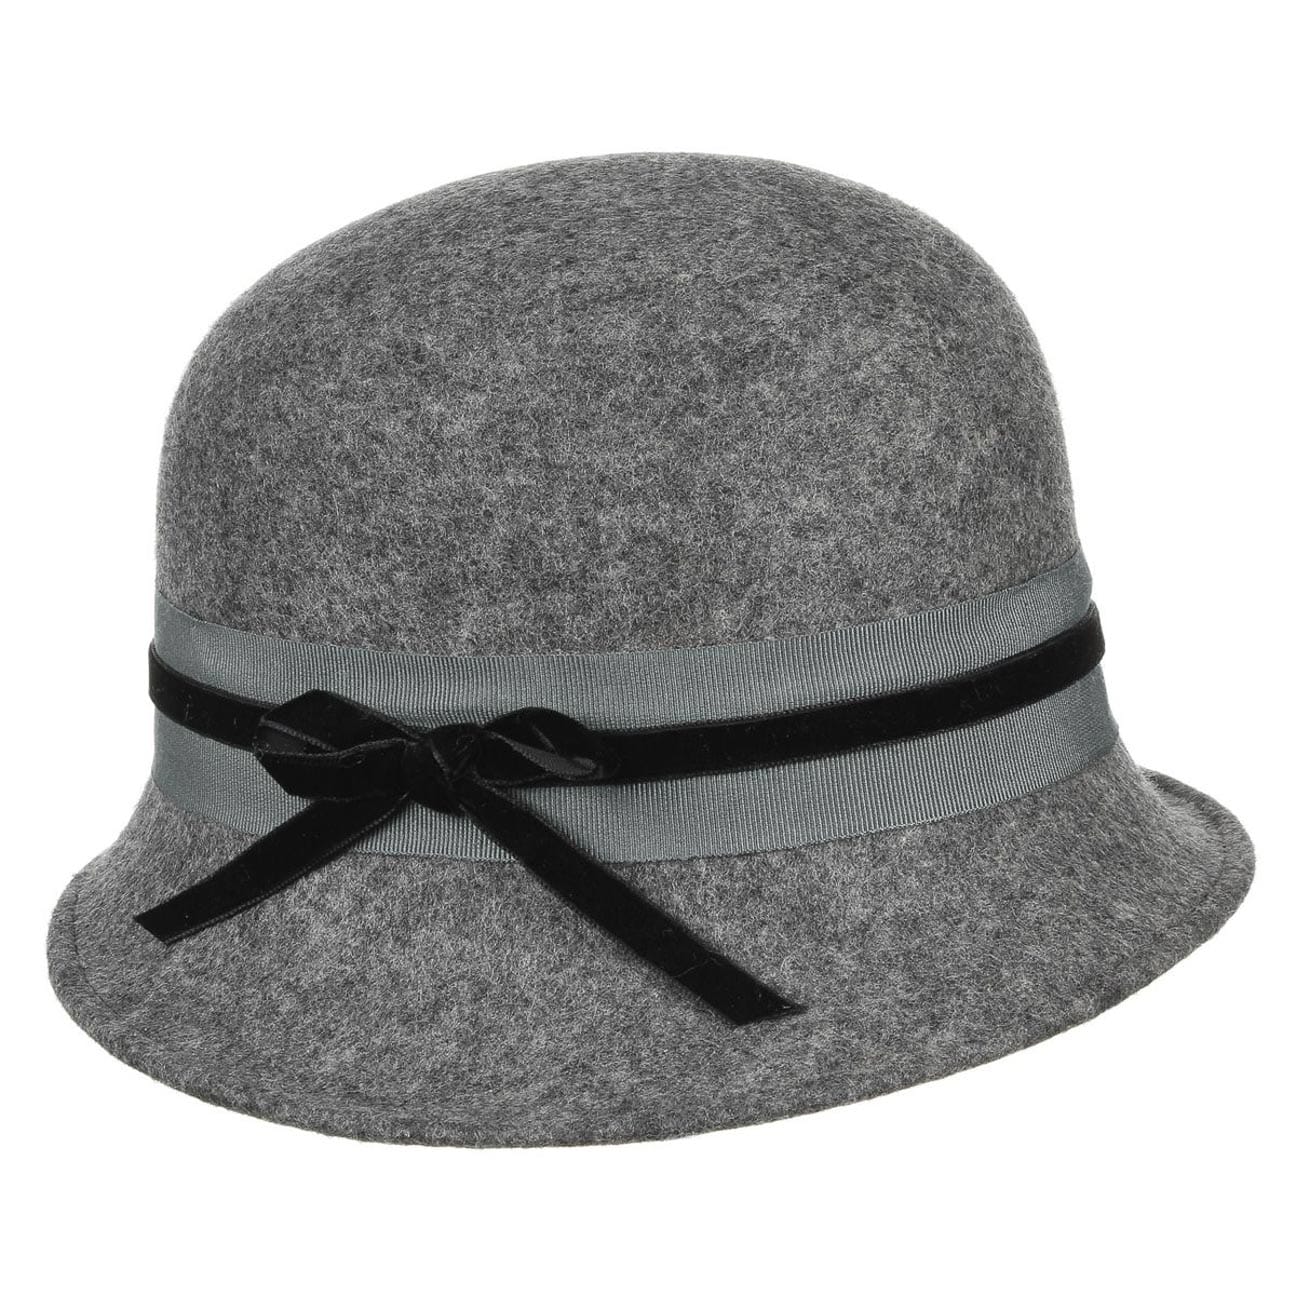 Grey Wool Felt Cloche With Dark Grey Petersham Band and Bow Winter Cloche Hat Accessoires Hoeden & petten Nette hoeden Cloche hoeden 